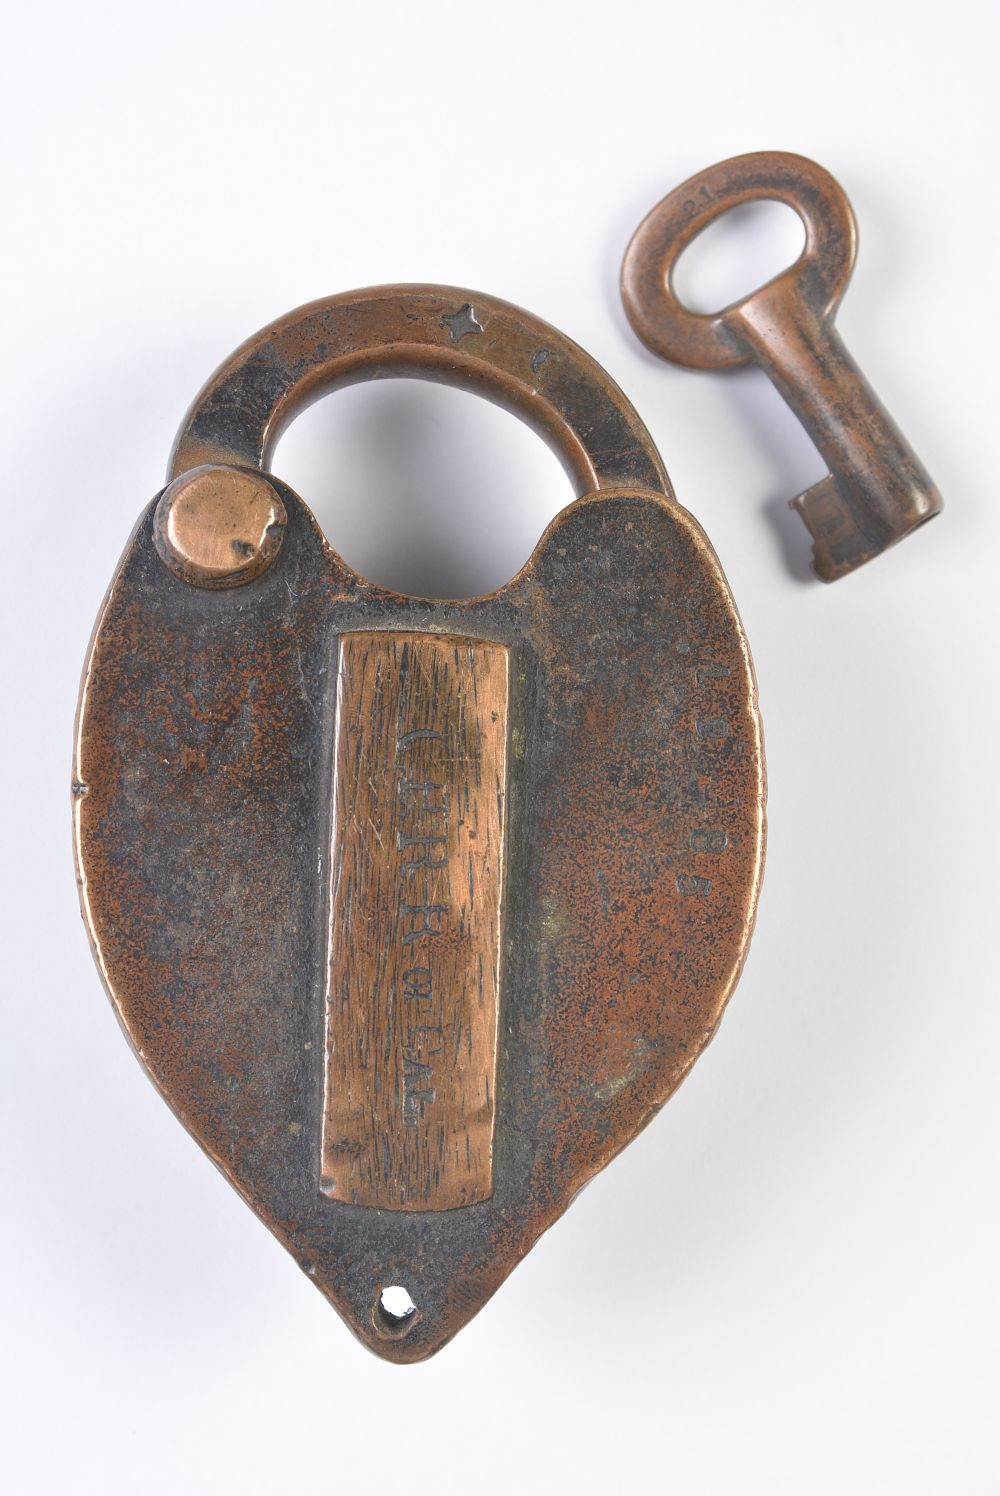 A HEART SHAPE BRASS PADLOCK STAMPED C.P.R.R. OF CAL